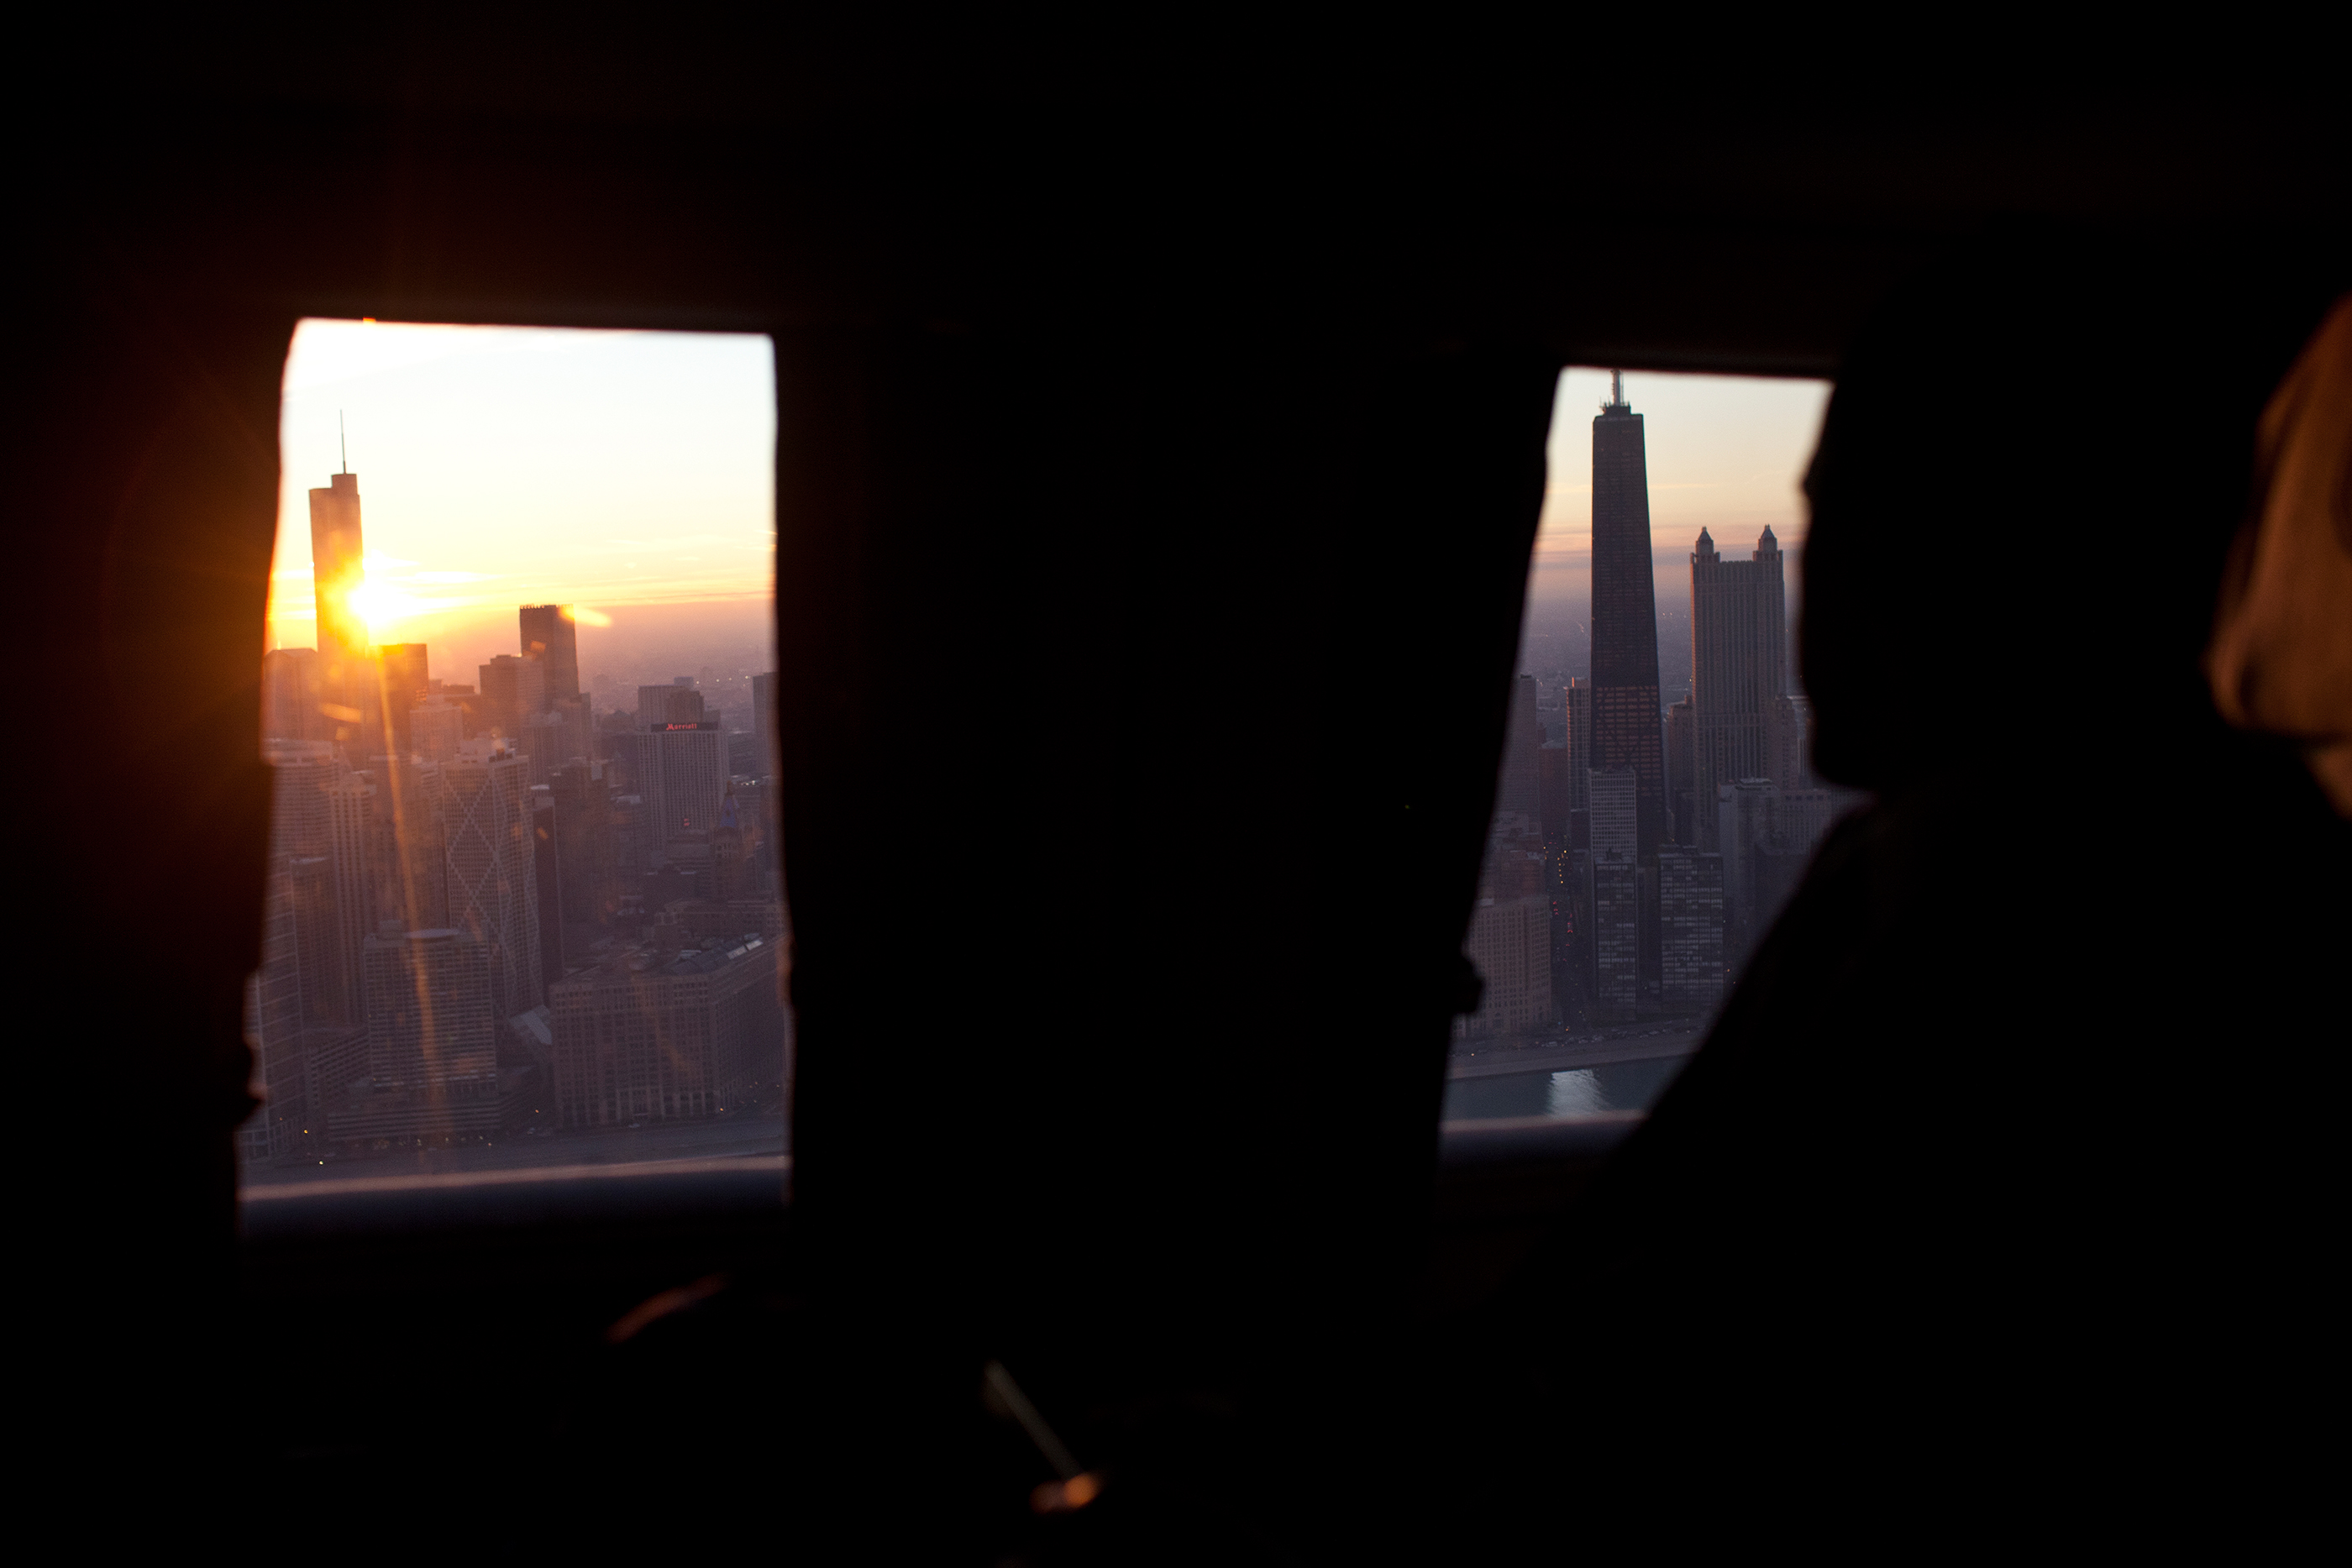 Illinois, Jan. 11, 2012. Viewing Chicago at sunset from Marine One. (Official White House Photo by Pete Souza)